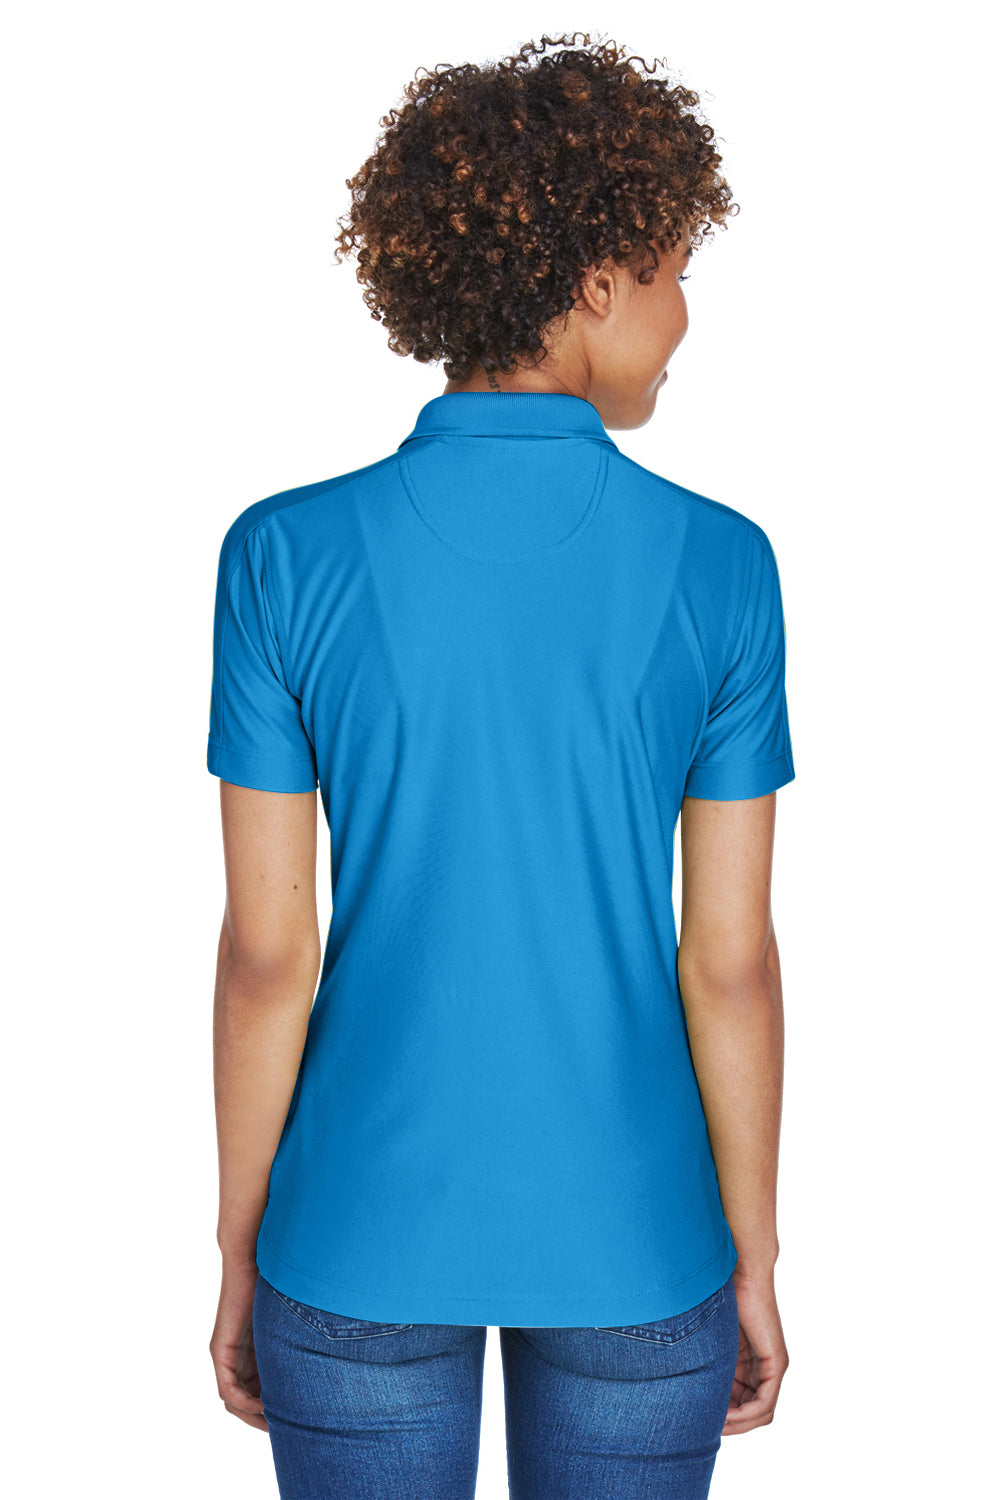 UltraClub 8414 Womens Cool & Dry Elite Performance Moisture Wicking Short Sleeve Polo Shirt Pacific Blue Back